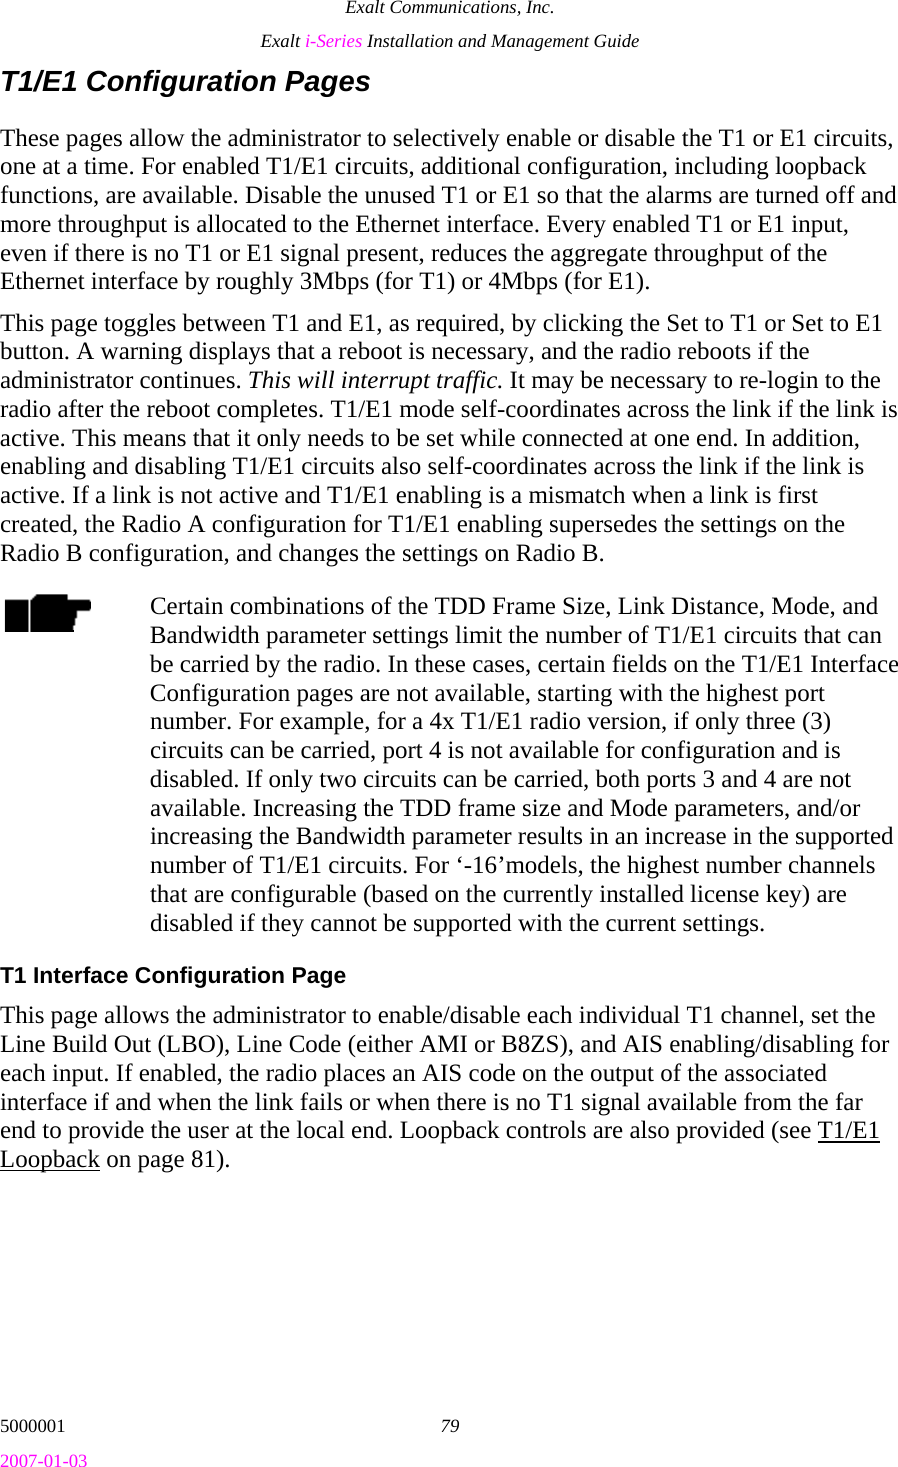 Exalt Communications, Inc. Exalt i-Series Installation and Management Guide 5000001  79 2007-01-03 T1/E1 Configuration Pages These pages allow the administrator to selectively enable or disable the T1 or E1 circuits, one at a time. For enabled T1/E1 circuits, additional configuration, including loopback functions, are available. Disable the unused T1 or E1 so that the alarms are turned off and more throughput is allocated to the Ethernet interface. Every enabled T1 or E1 input, even if there is no T1 or E1 signal present, reduces the aggregate throughput of the Ethernet interface by roughly 3Mbps (for T1) or 4Mbps (for E1). This page toggles between T1 and E1, as required, by clicking the Set to T1 or Set to E1 button. A warning displays that a reboot is necessary, and the radio reboots if the administrator continues. This will interrupt traffic. It may be necessary to re-login to the radio after the reboot completes. T1/E1 mode self-coordinates across the link if the link is active. This means that it only needs to be set while connected at one end. In addition, enabling and disabling T1/E1 circuits also self-coordinates across the link if the link is active. If a link is not active and T1/E1 enabling is a mismatch when a link is first created, the Radio A configuration for T1/E1 enabling supersedes the settings on the Radio B configuration, and changes the settings on Radio B. Certain combinations of the TDD Frame Size, Link Distance, Mode, and Bandwidth parameter settings limit the number of T1/E1 circuits that can be carried by the radio. In these cases, certain fields on the T1/E1 Interface Configuration pages are not available, starting with the highest port number. For example, for a 4x T1/E1 radio version, if only three (3) circuits can be carried, port 4 is not available for configuration and is disabled. If only two circuits can be carried, both ports 3 and 4 are not available. Increasing the TDD frame size and Mode parameters, and/or increasing the Bandwidth parameter results in an increase in the supported number of T1/E1 circuits. For ‘-16’models, the highest number channels that are configurable (based on the currently installed license key) are disabled if they cannot be supported with the current settings. T1 Interface Configuration Page This page allows the administrator to enable/disable each individual T1 channel, set the Line Build Out (LBO), Line Code (either AMI or B8ZS), and AIS enabling/disabling for each input. If enabled, the radio places an AIS code on the output of the associated interface if and when the link fails or when there is no T1 signal available from the far end to provide the user at the local end. Loopback controls are also provided (see T1/E1 Loopback on page 81). 